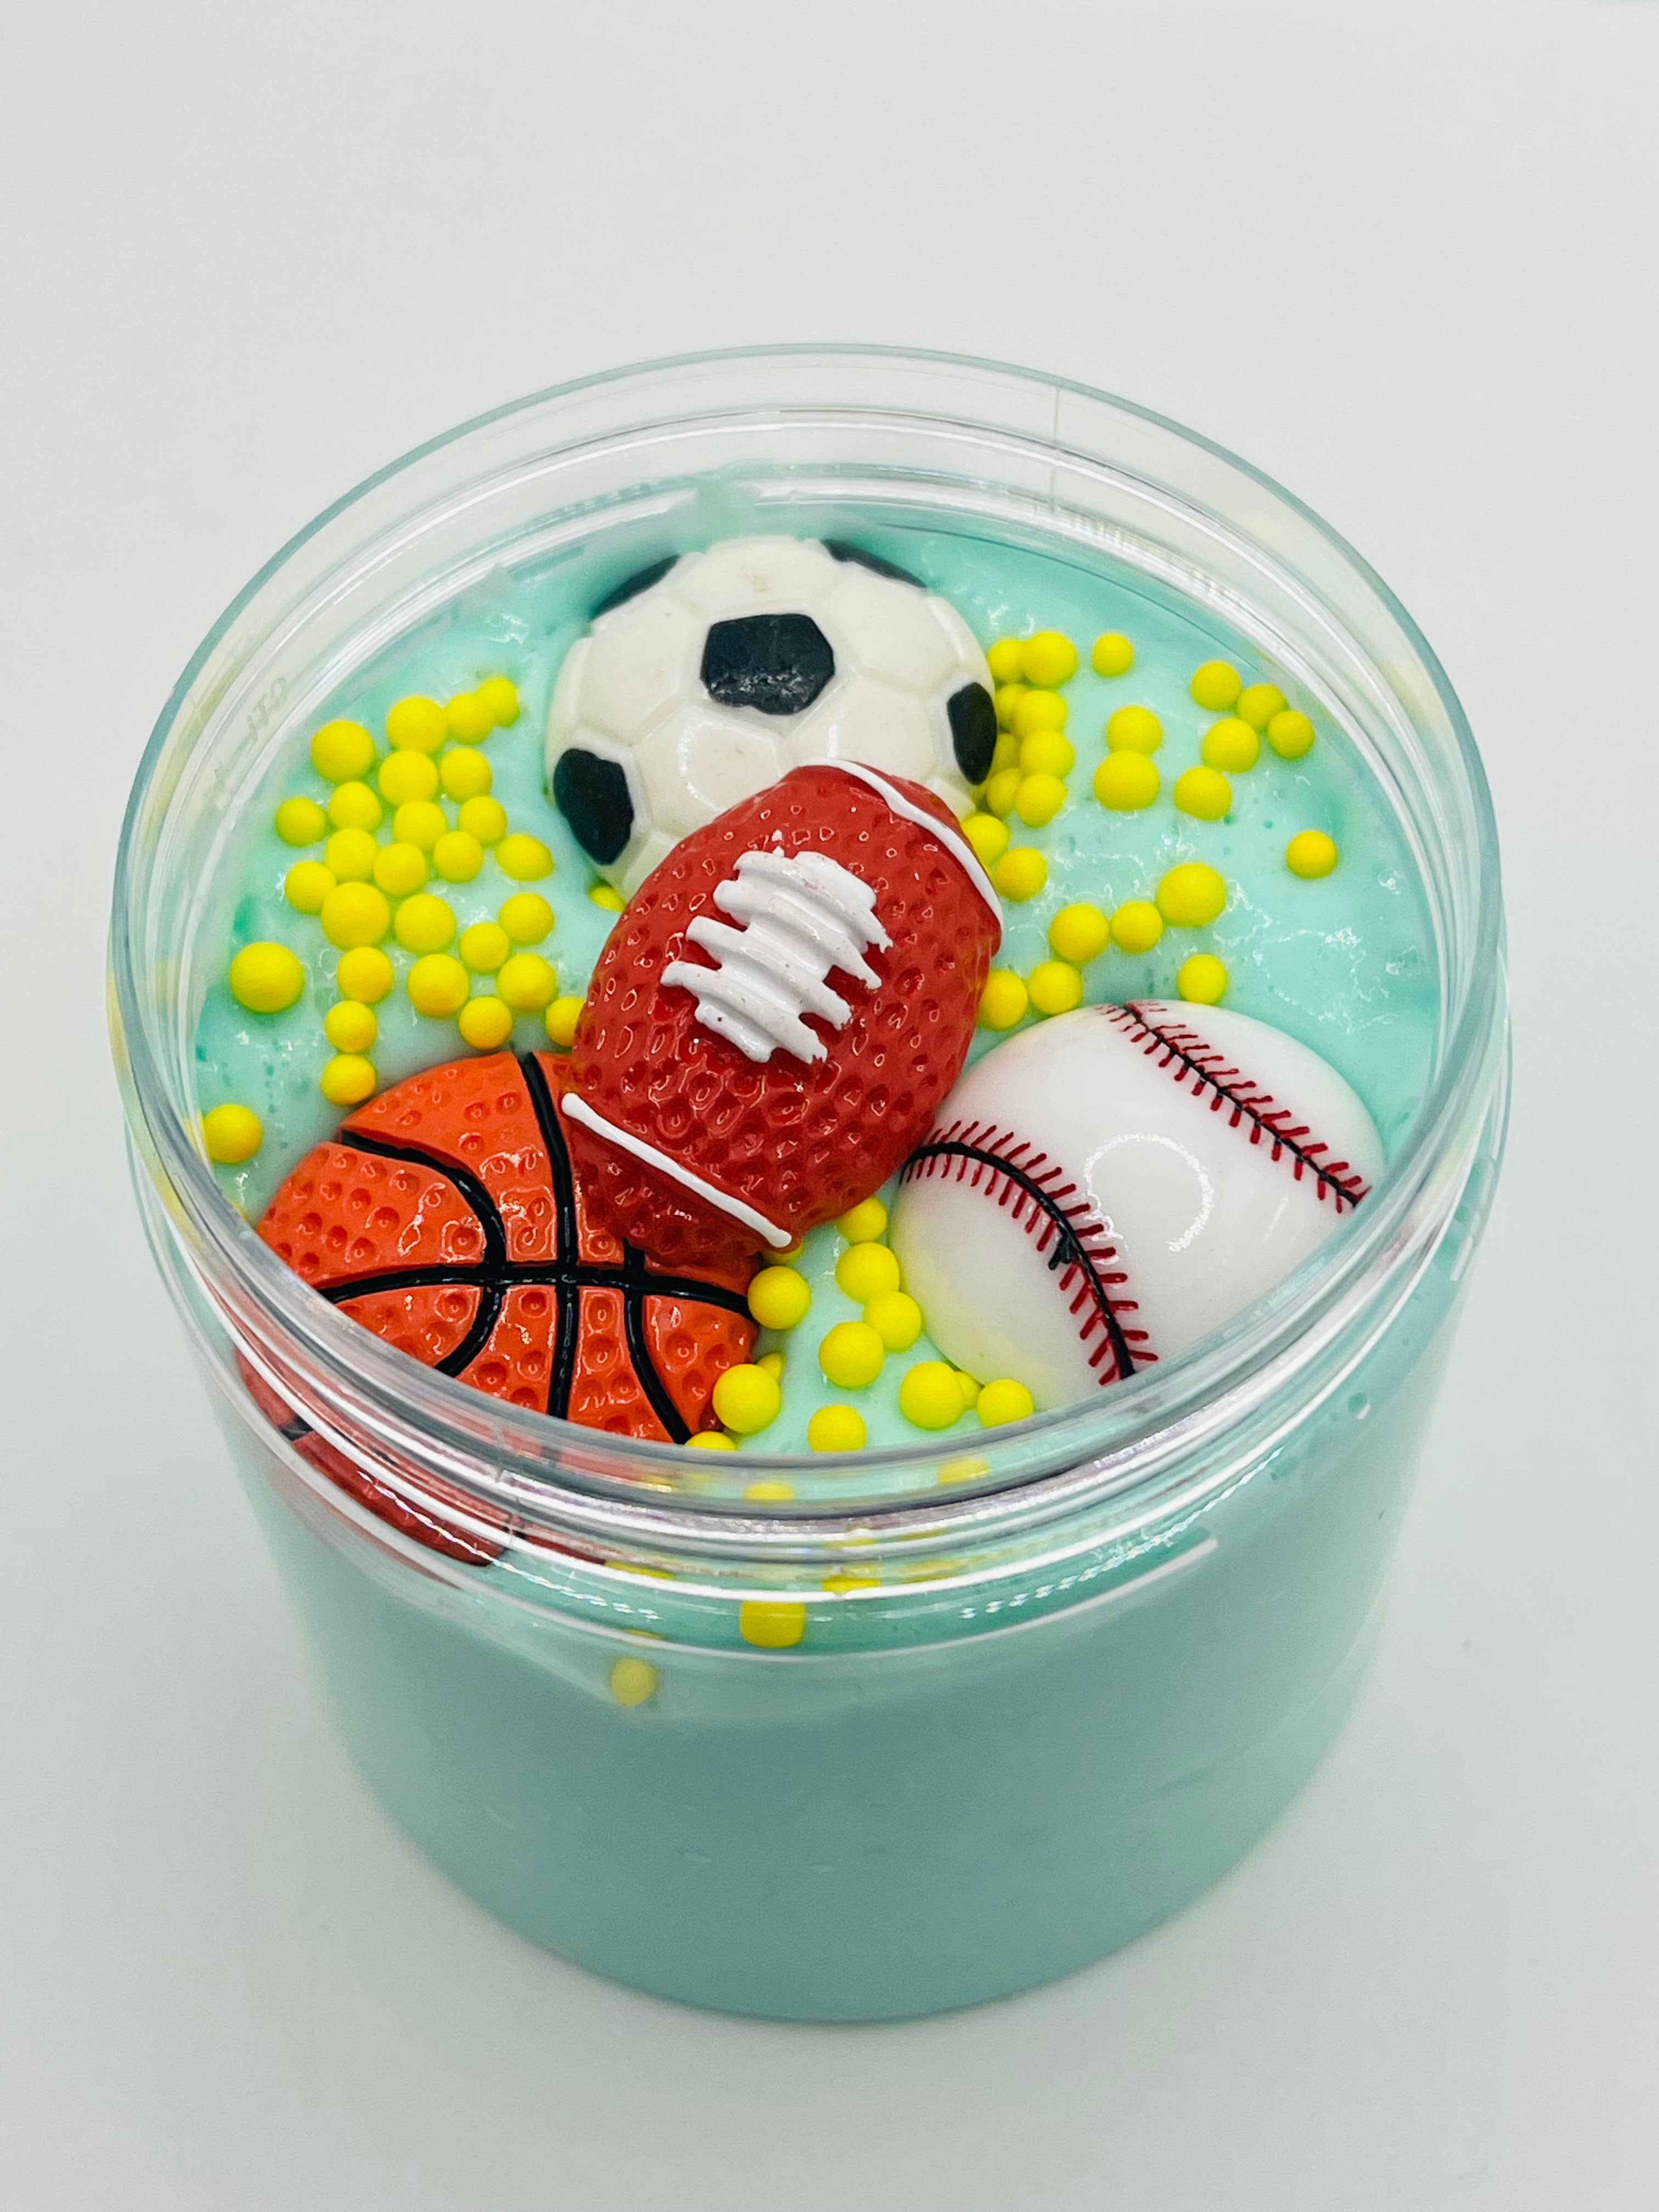 All Star Sports Butter Slime Toy